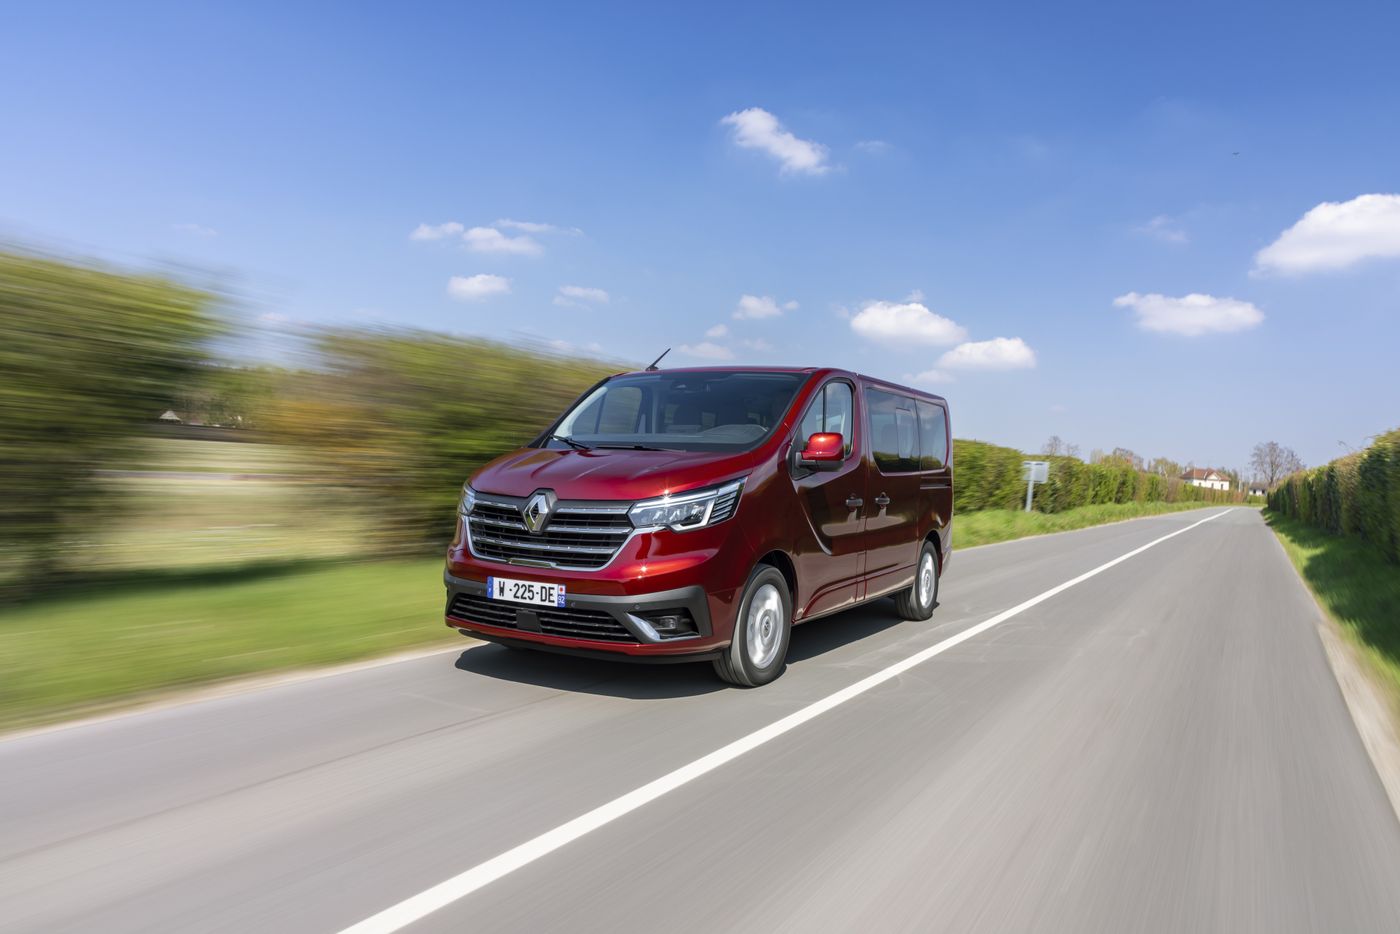 2021 - New Renault Trafic Combi - Tests drive (4)